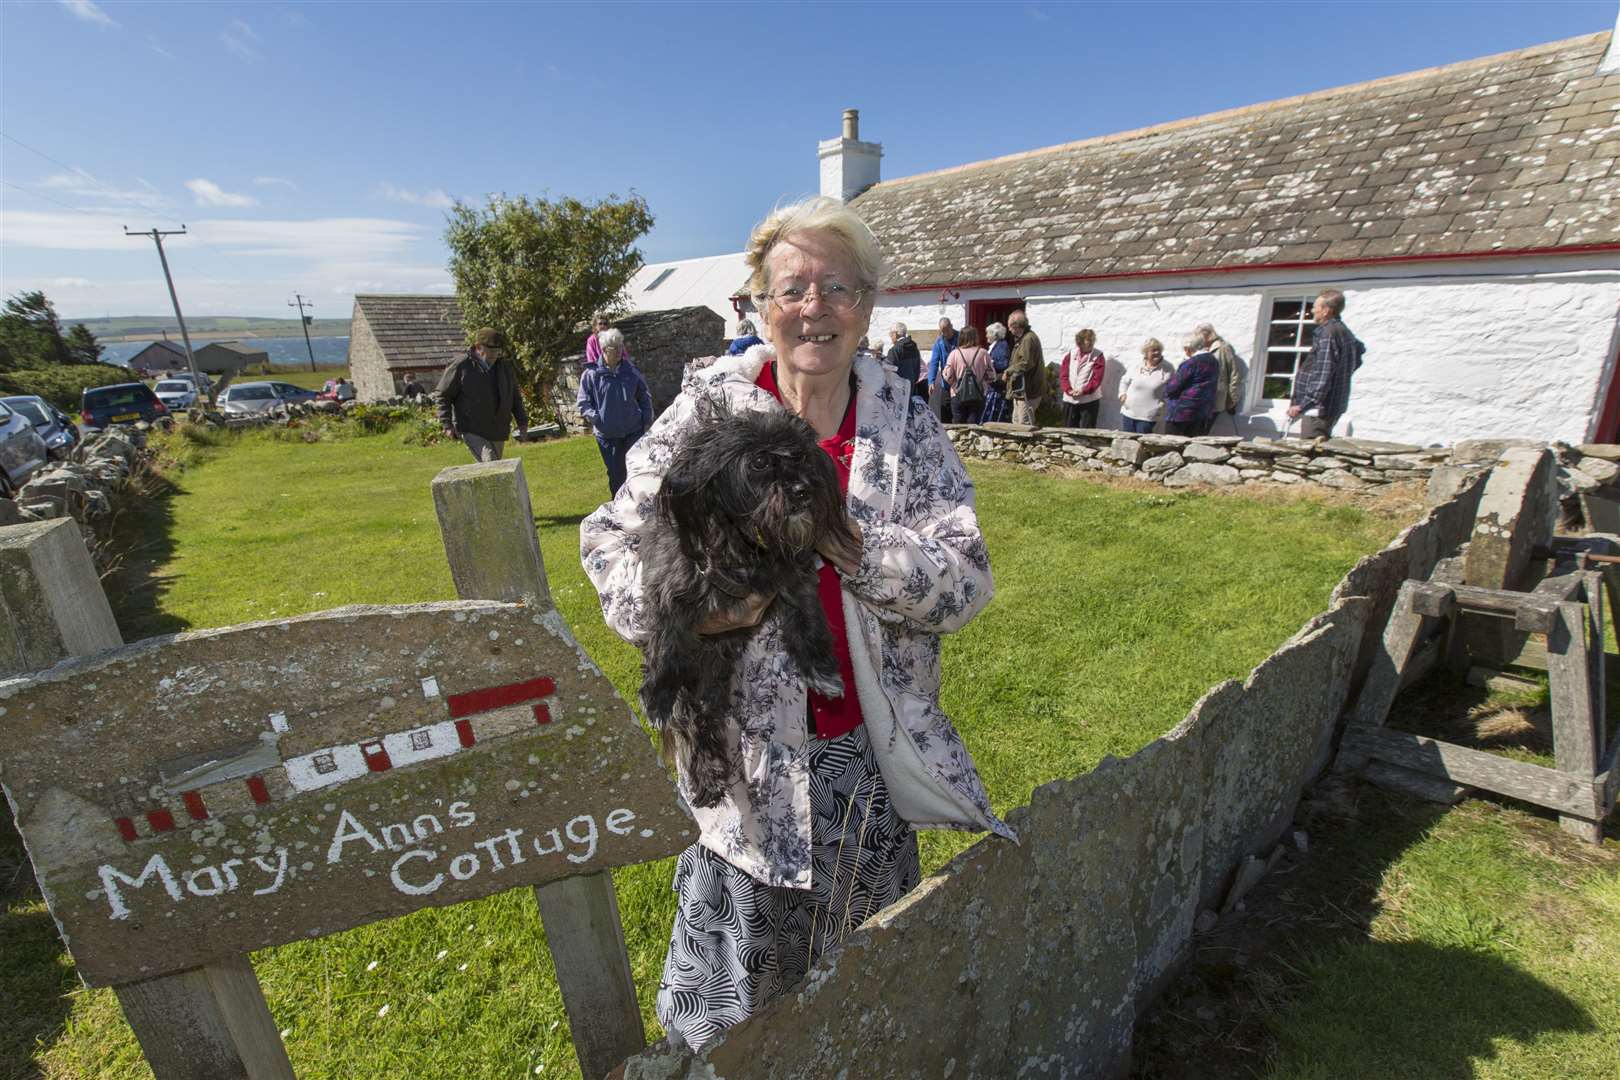 One of the farthest-travelled volunteers is Lyz Day (with her dog Laika), who lives in Switzerland. She spends six months of the year in Thurso and is one of the volunteer guides at Mary Ann's Cottage. Picture: Robert MacDonald / Northern Studios